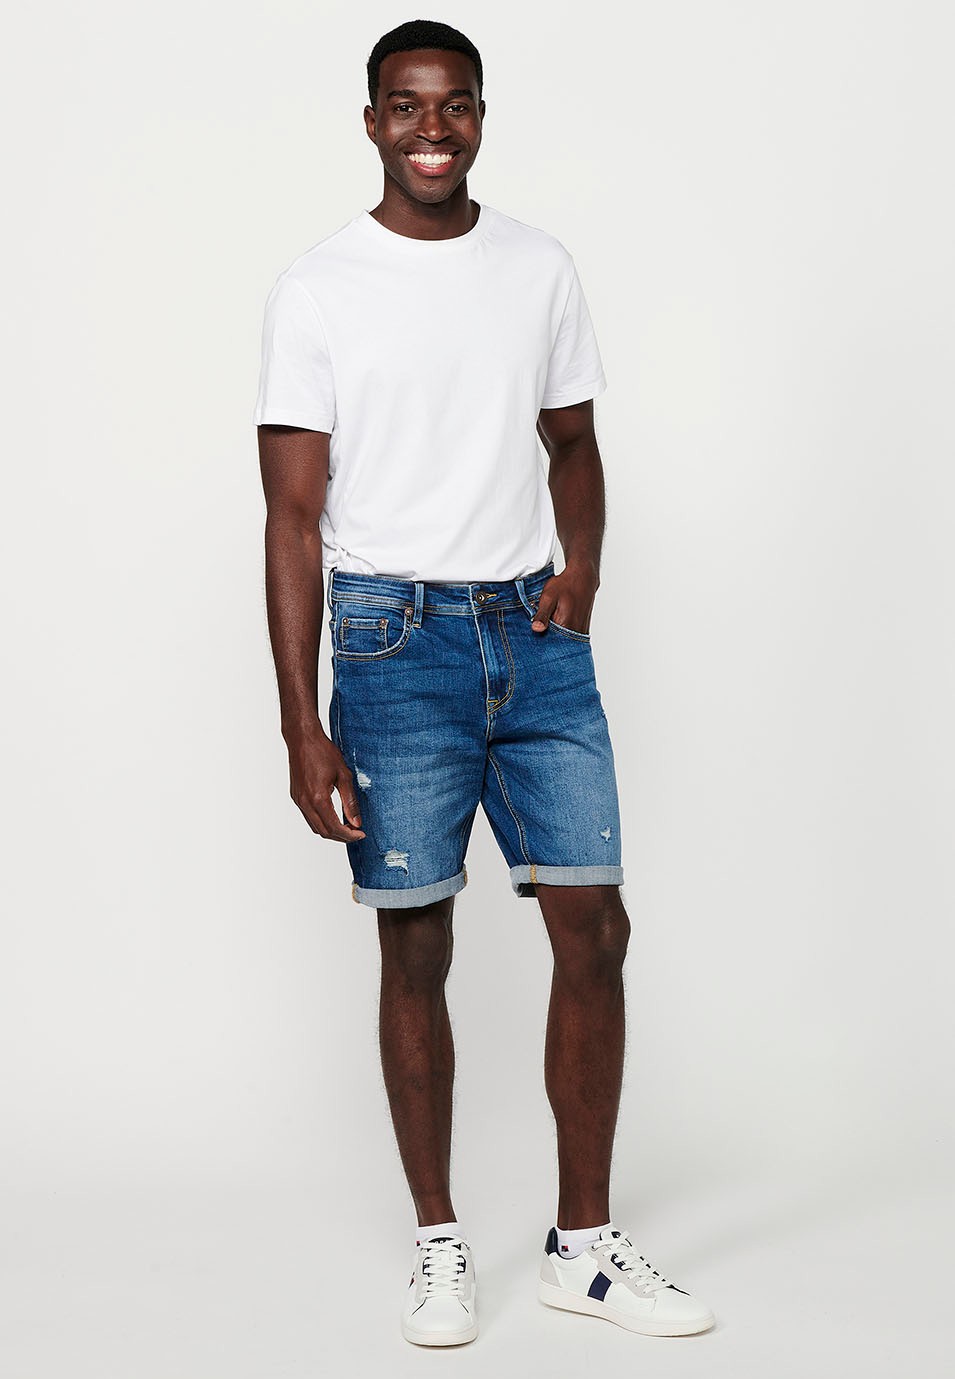 Shorts with turn-up finish and front zipper and button closure with five pockets, one blue pocket pocket for Men